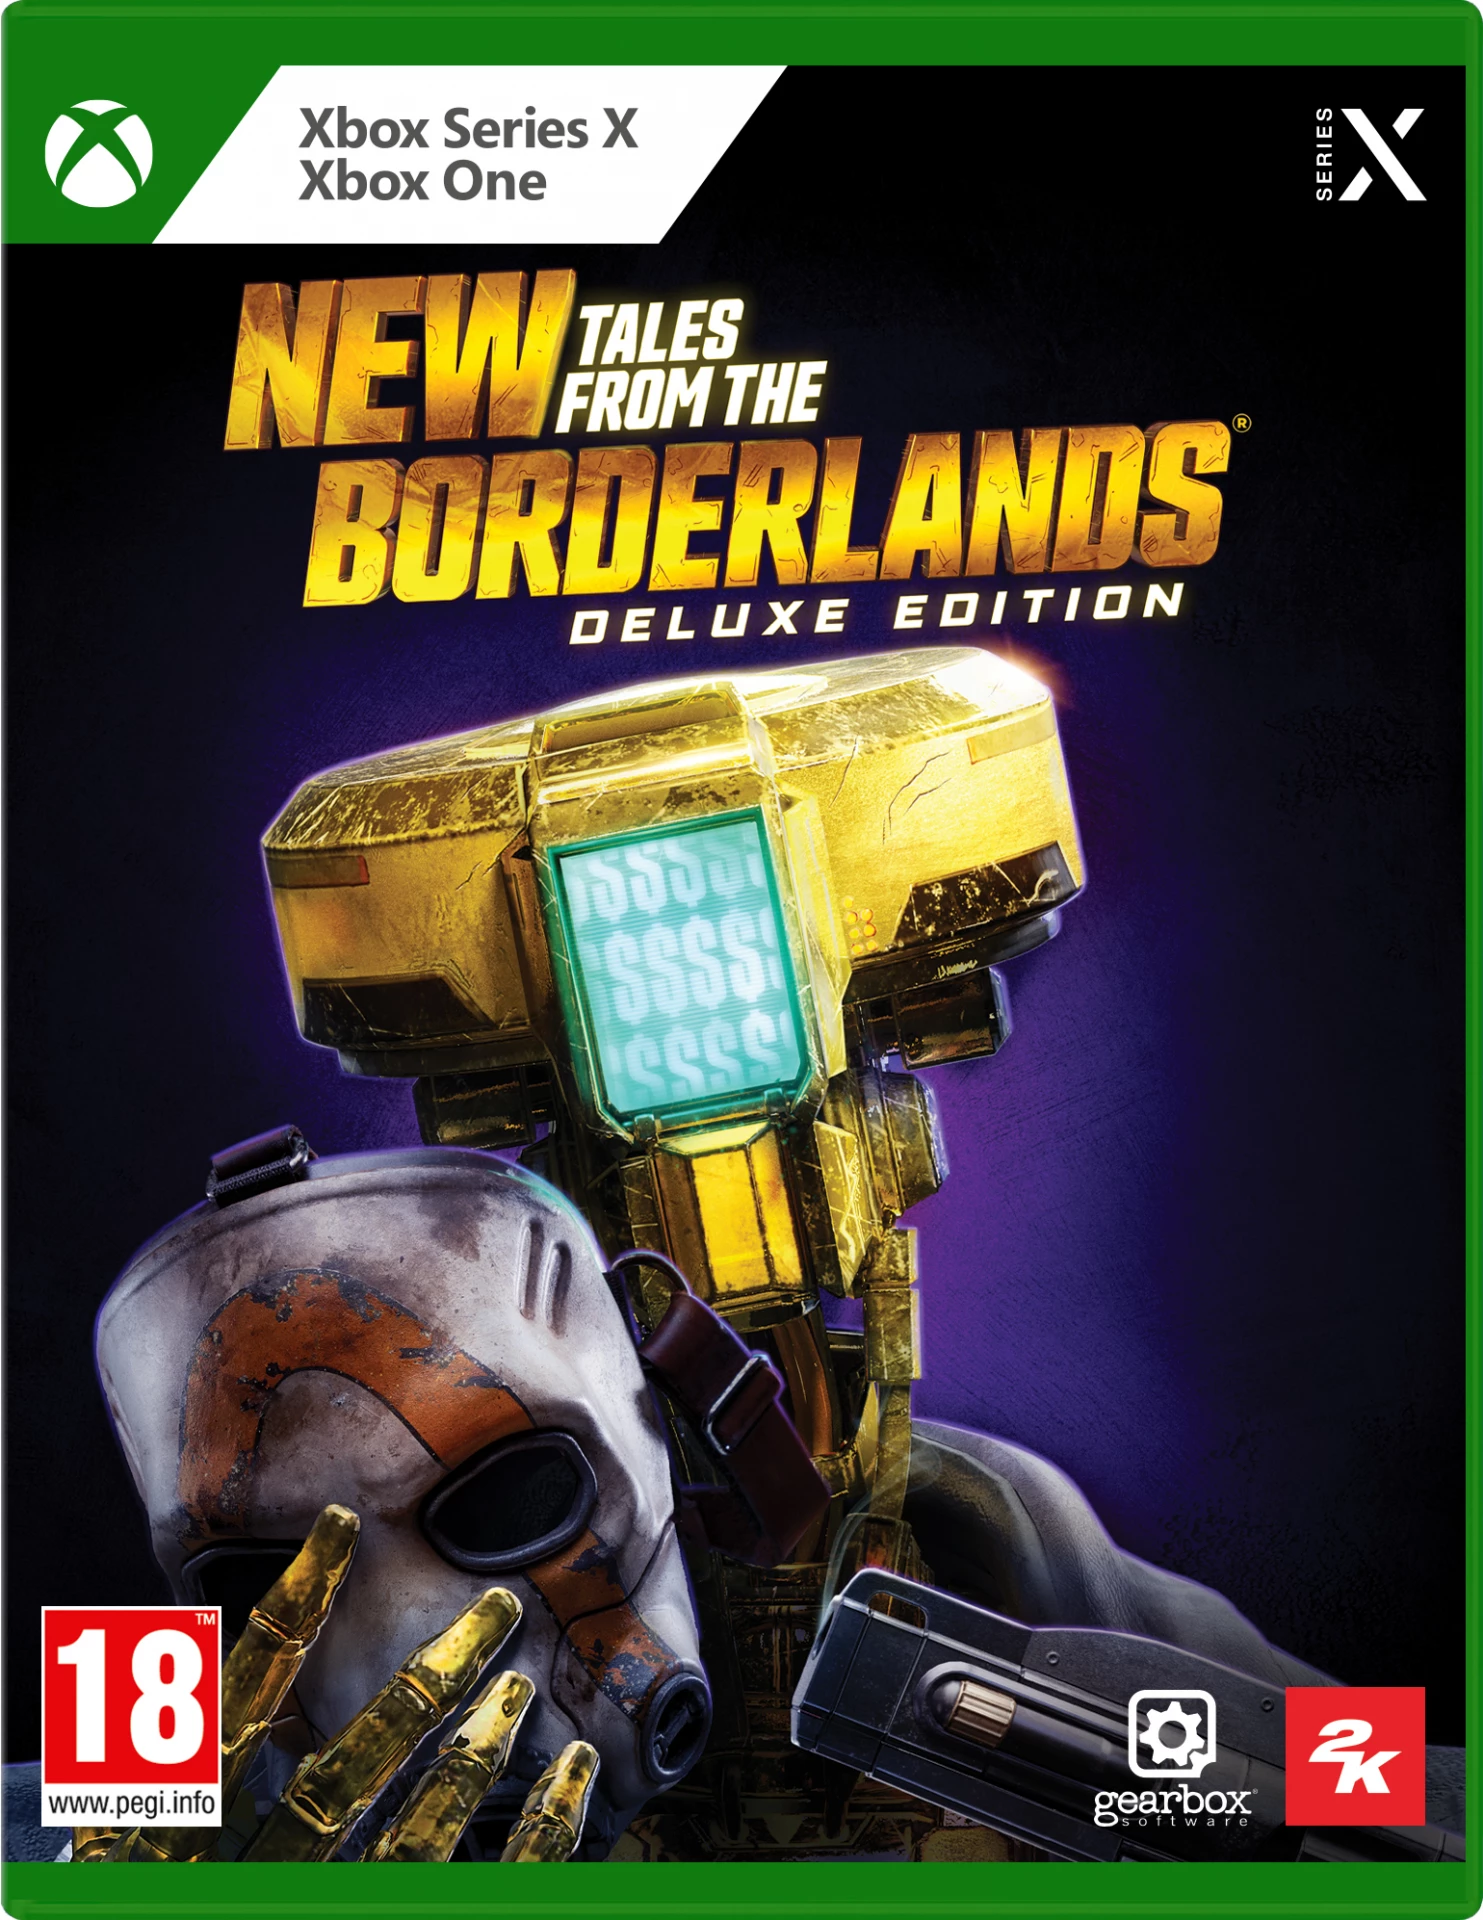 New Tales from the Borderlands - Deluxe Edition (Xbox Series X), Gearbox Entertainment